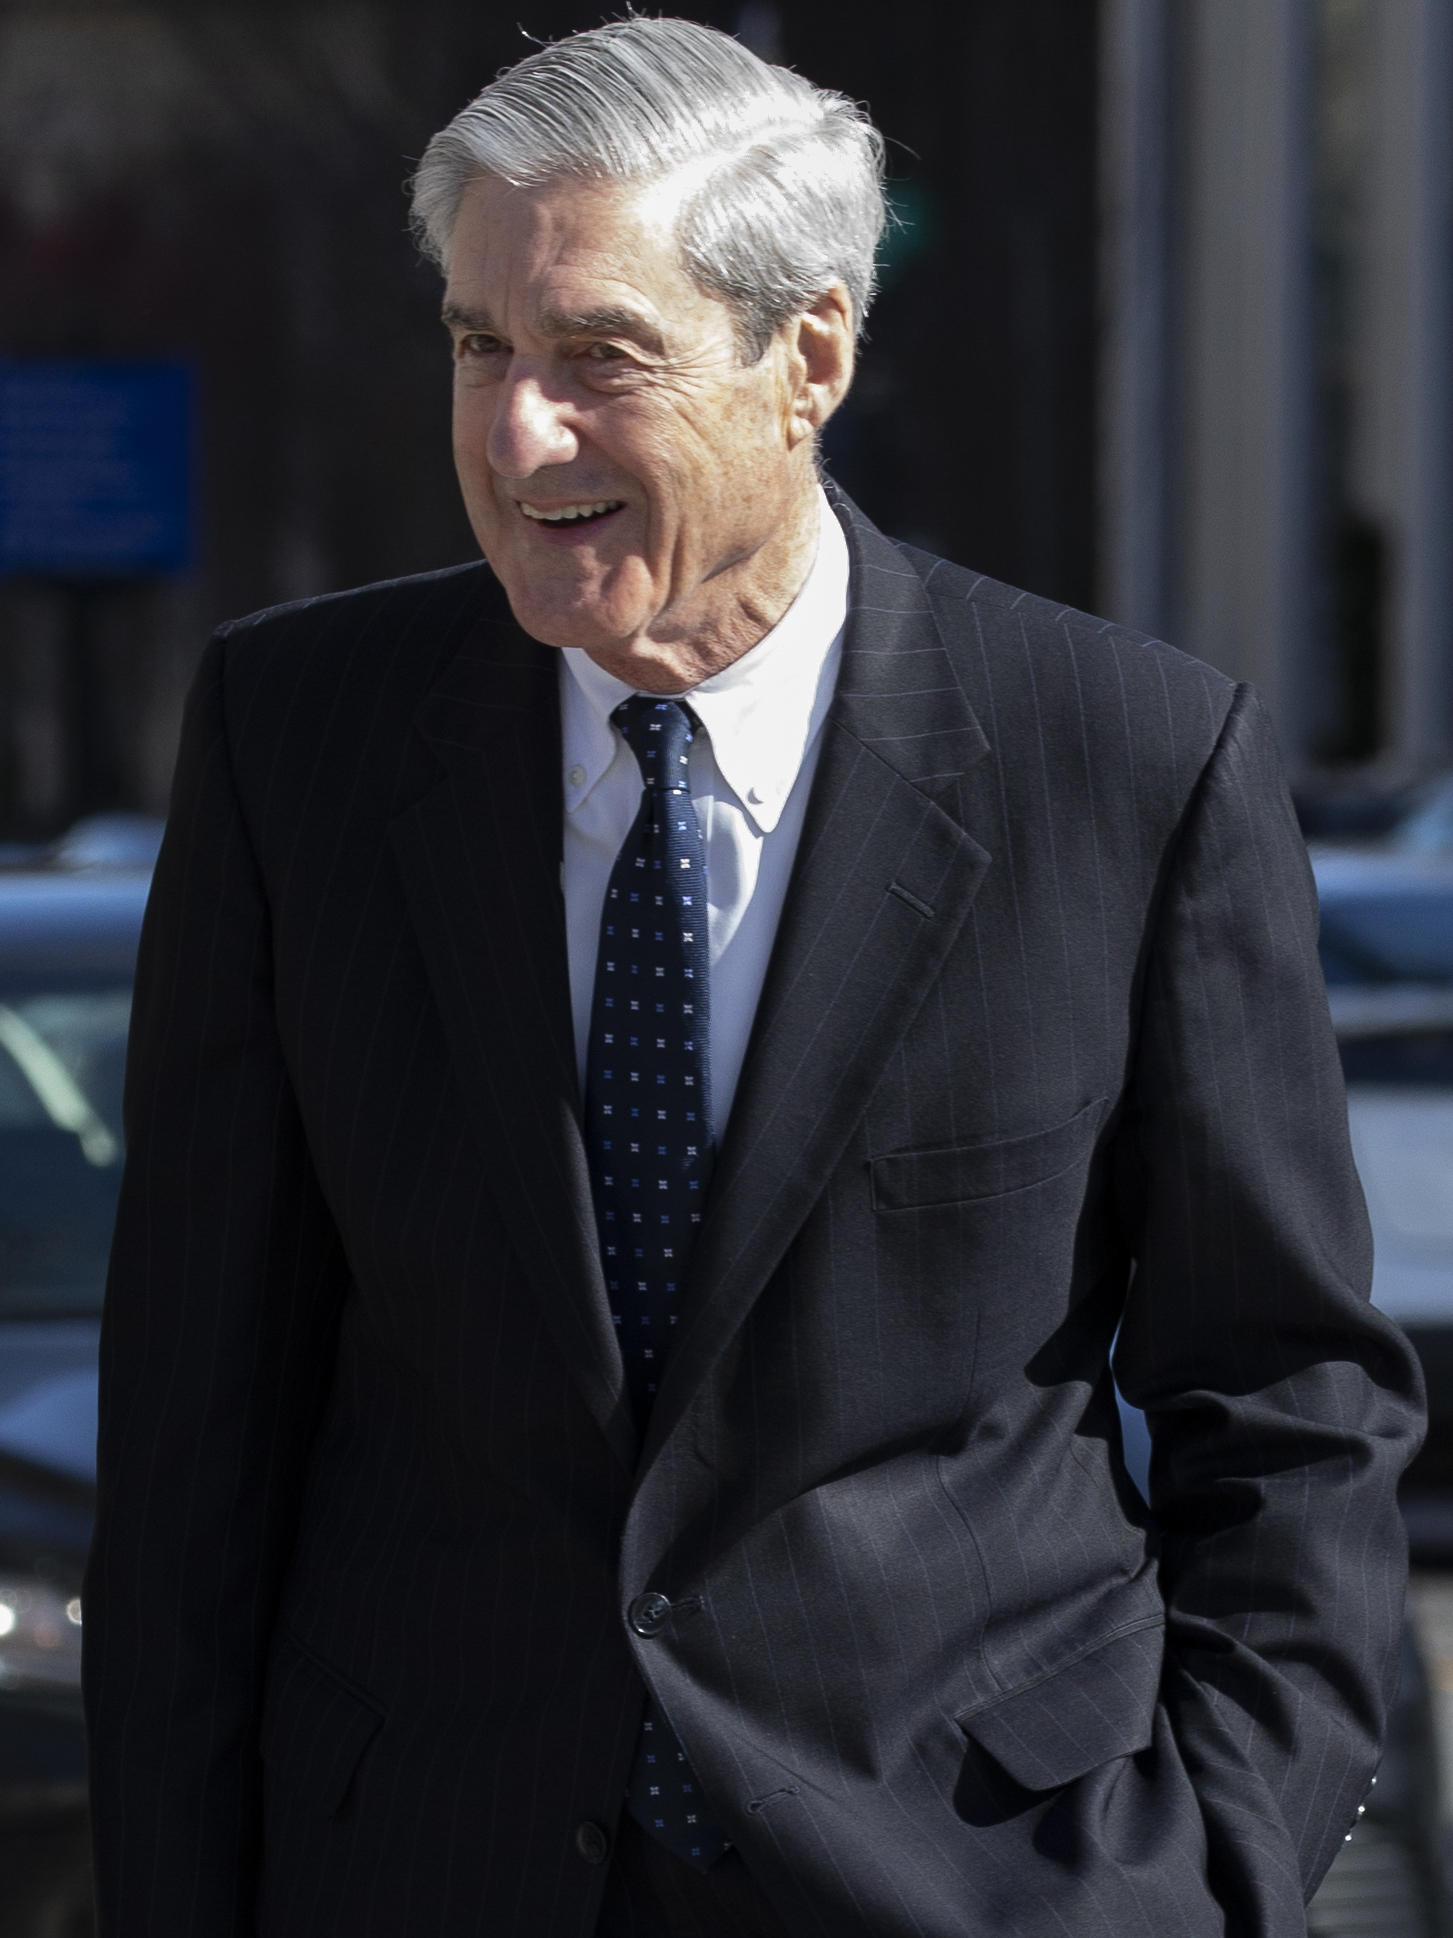 will the full mueller report be released